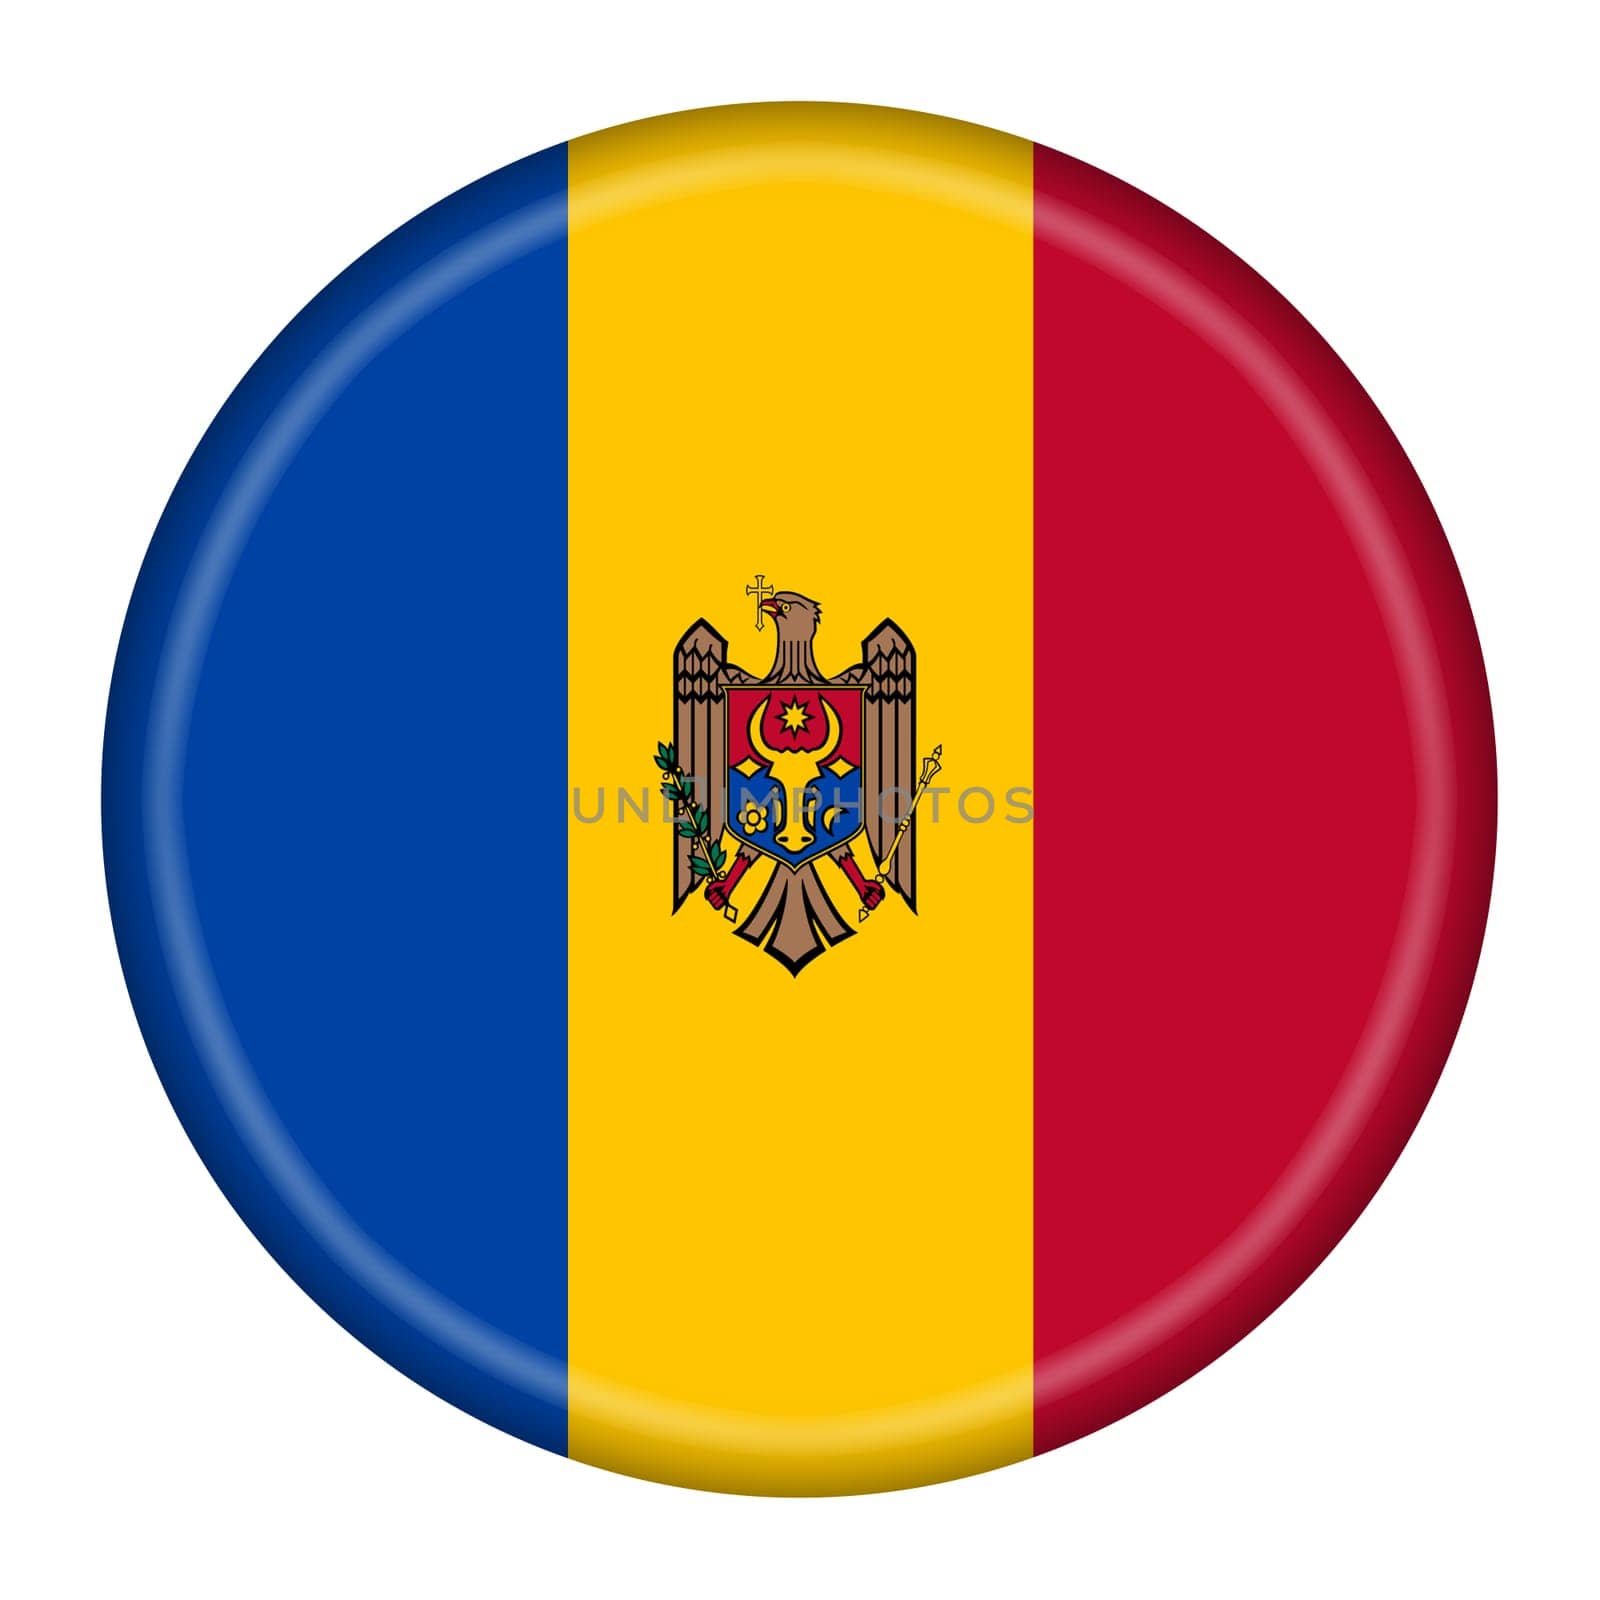 Moldova flag button 3d illustration with clipping path by VivacityImages